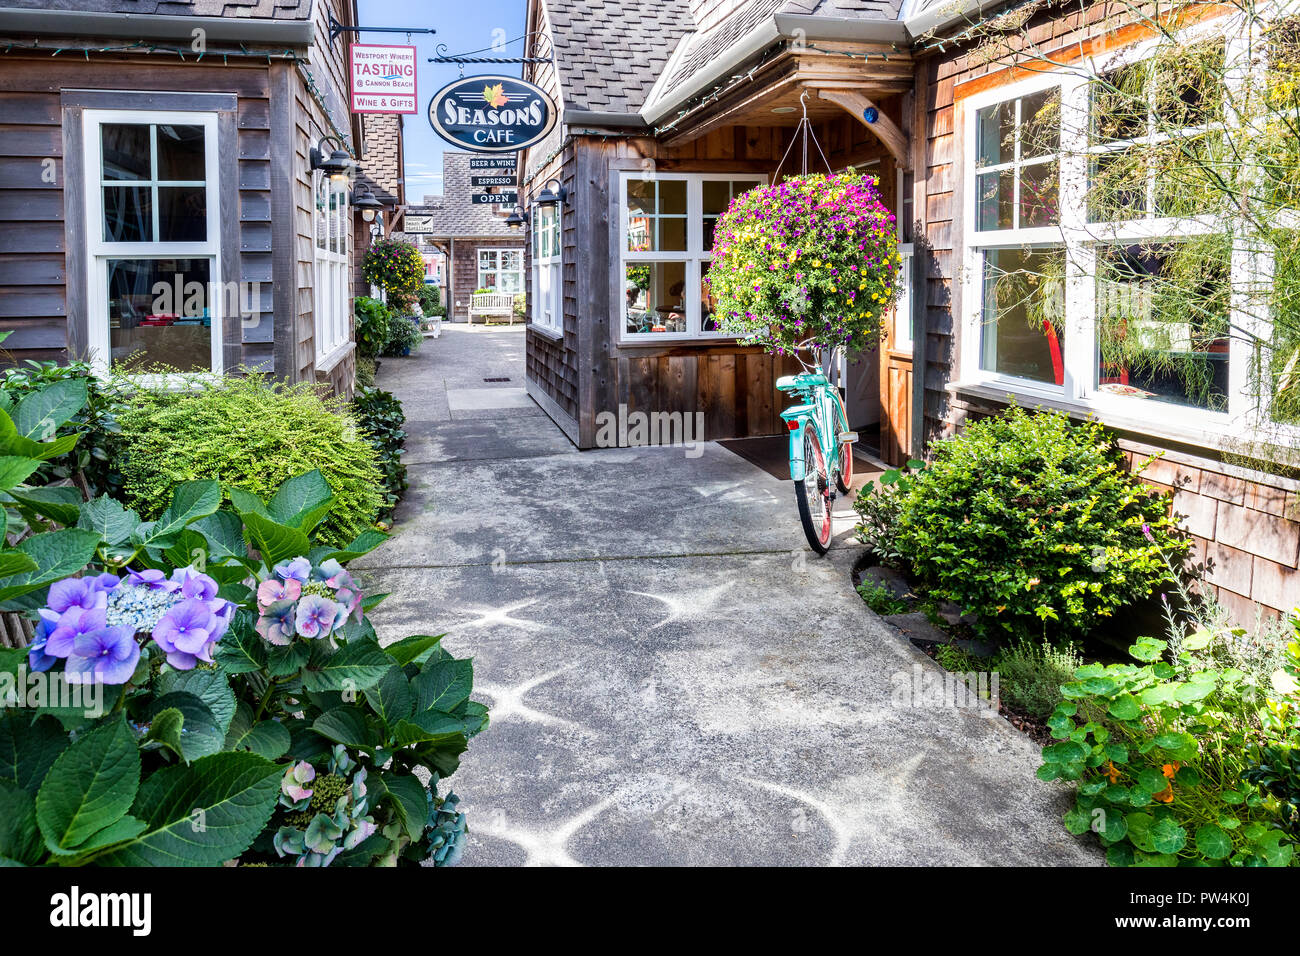 The well known Season's Cafe and other shops in quaint  Cannon Beach, Oregon, USA. Stock Photo